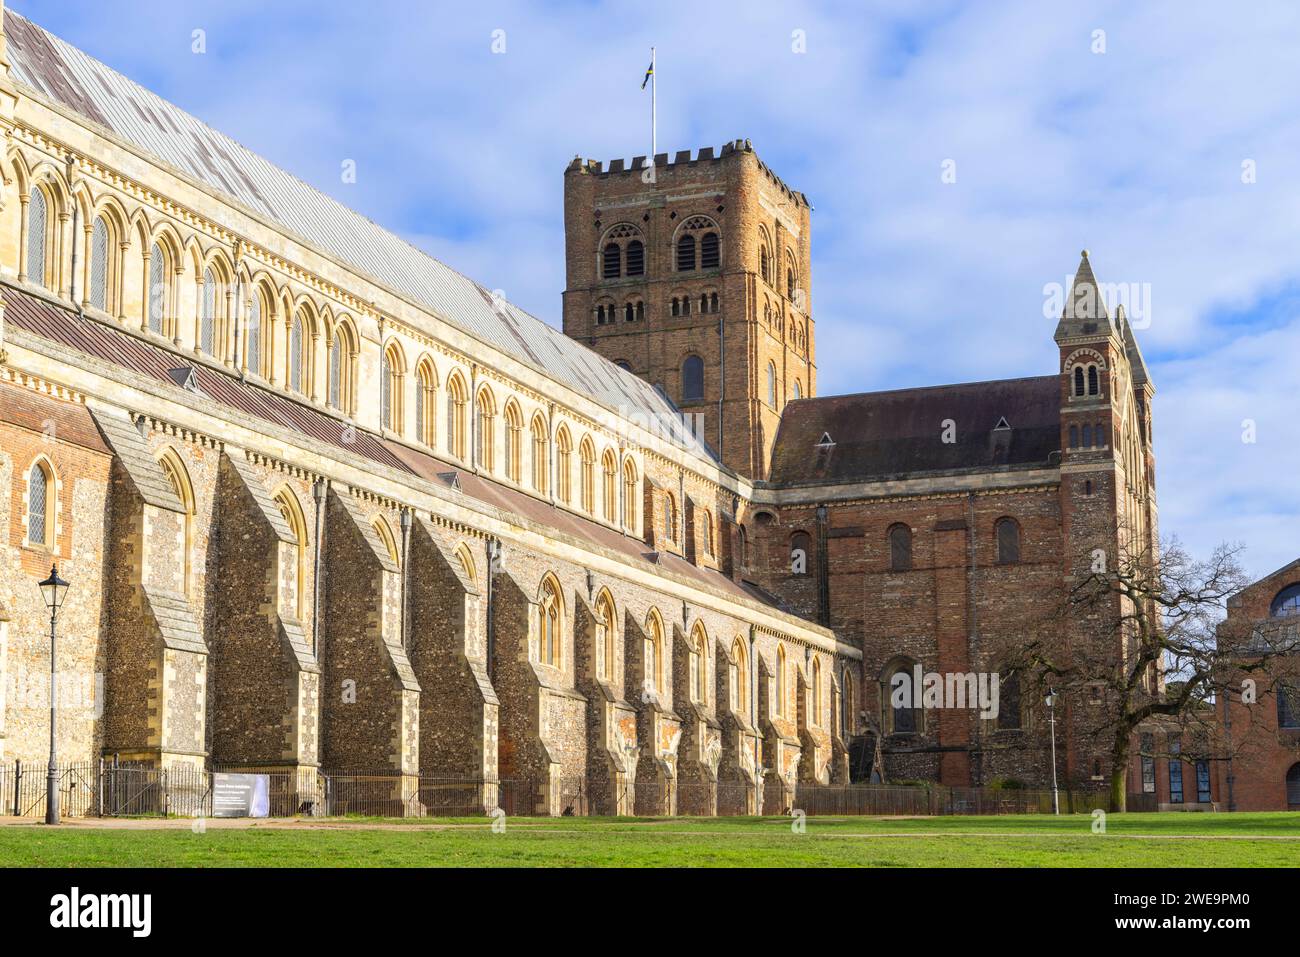 St Albans Cathedral or the Abbey Church of St Alban St Albans Hertfordshire England UK GB Europe Stock Photo